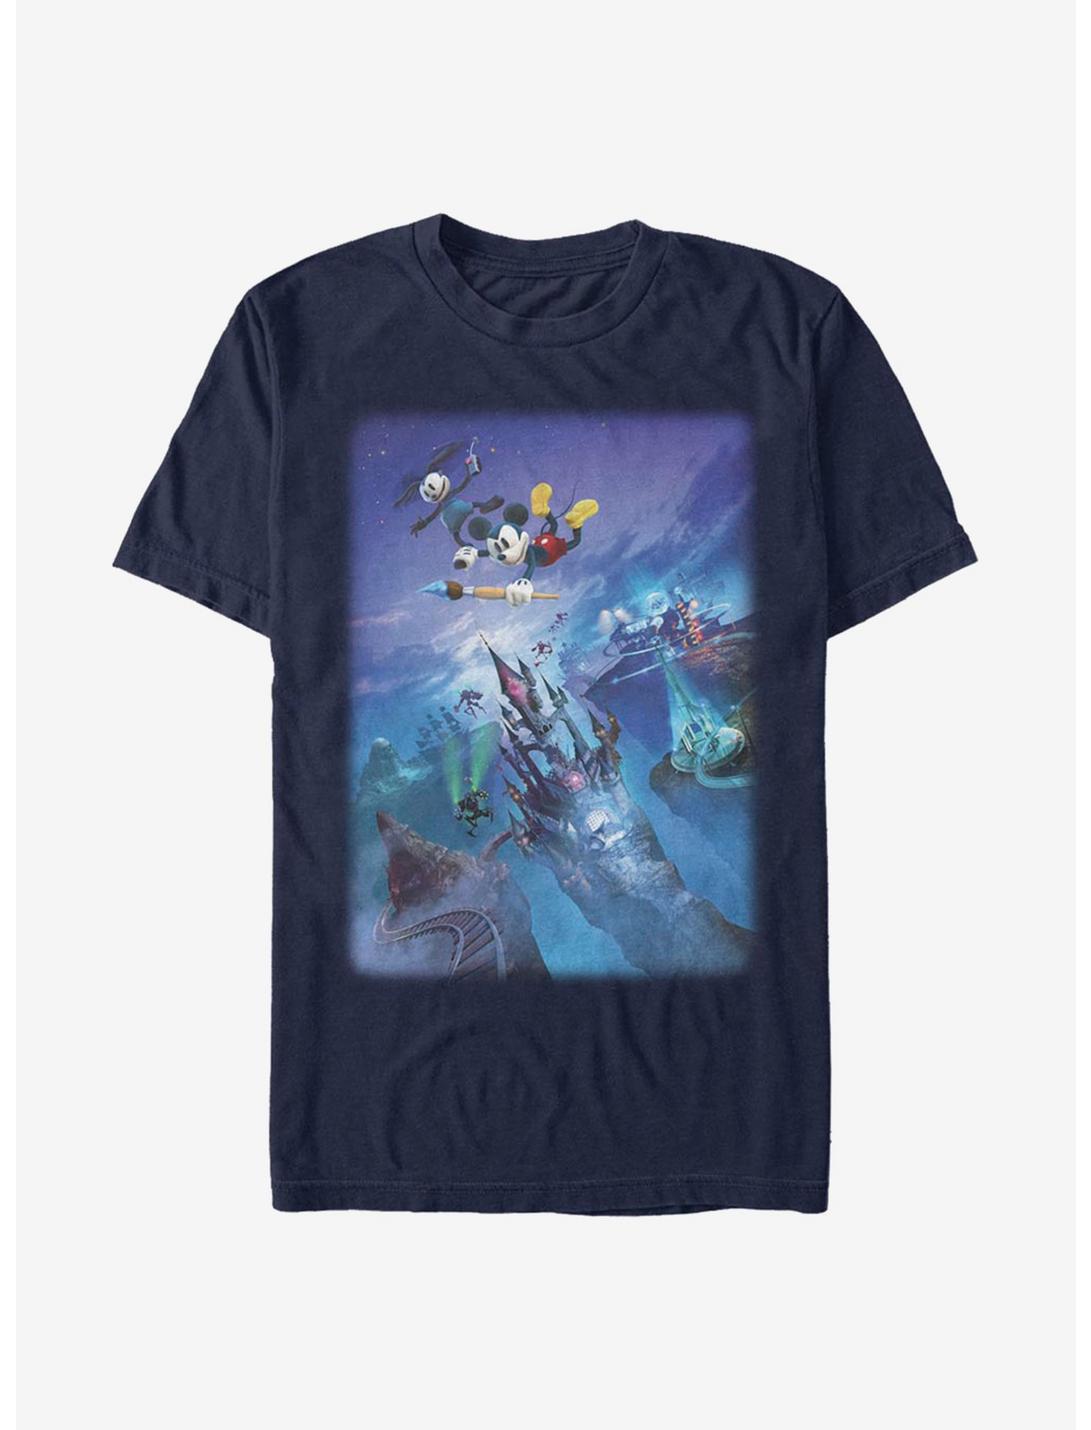 Disney Epic Mickey Flying By Poster T-Shirt, NAVY, hi-res